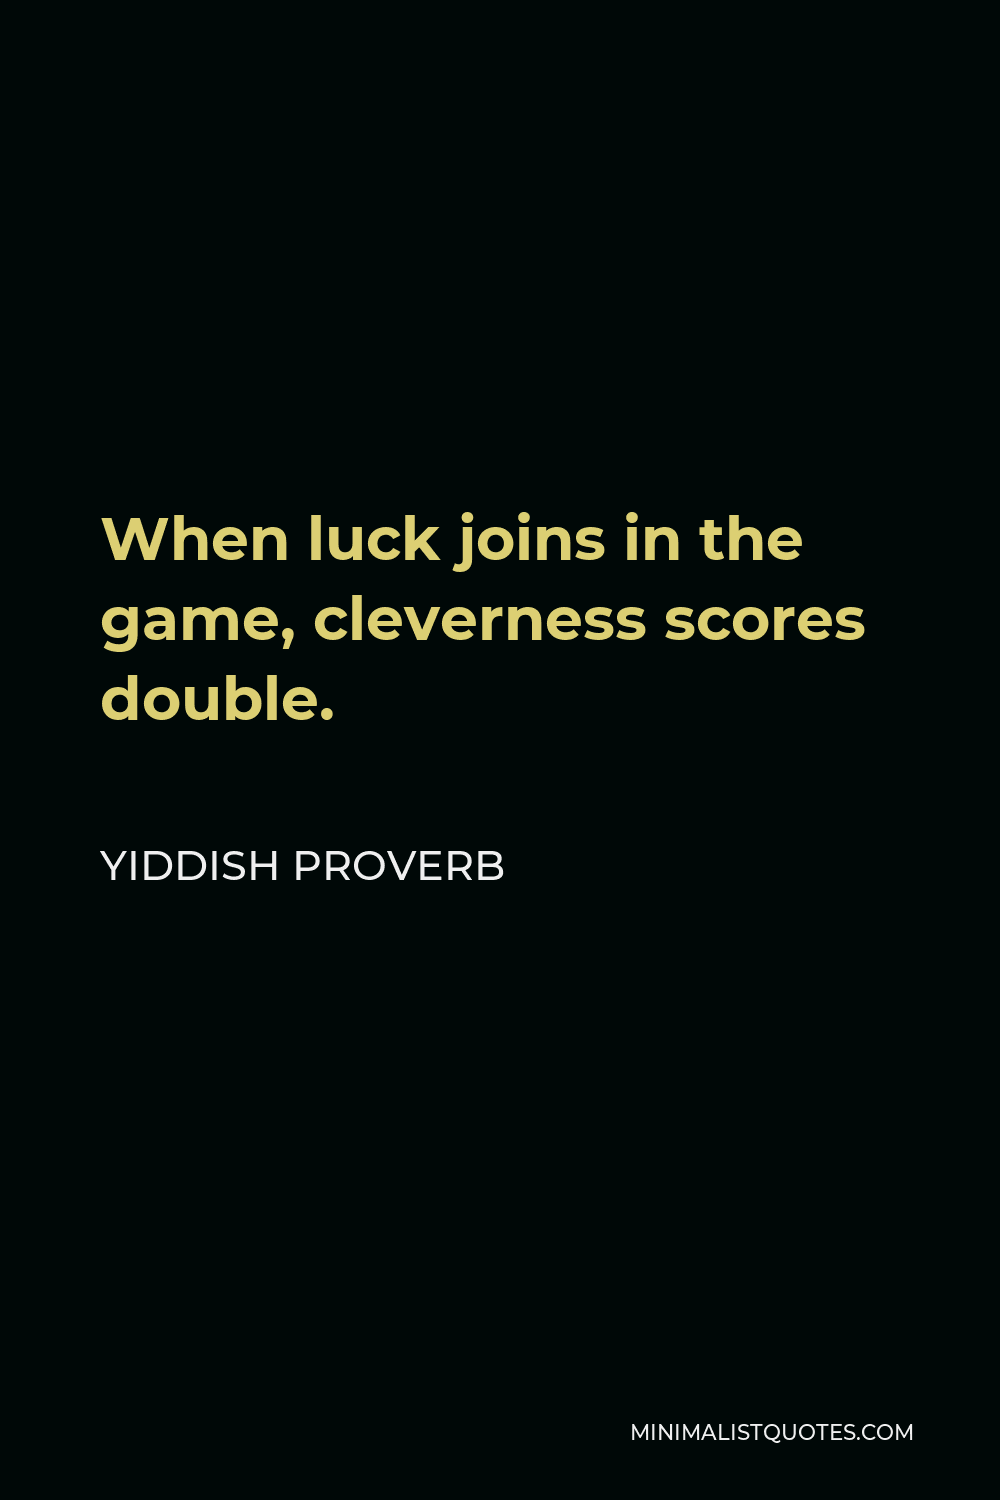 Yiddish Proverb Quote - When luck joins in the game, cleverness scores double.